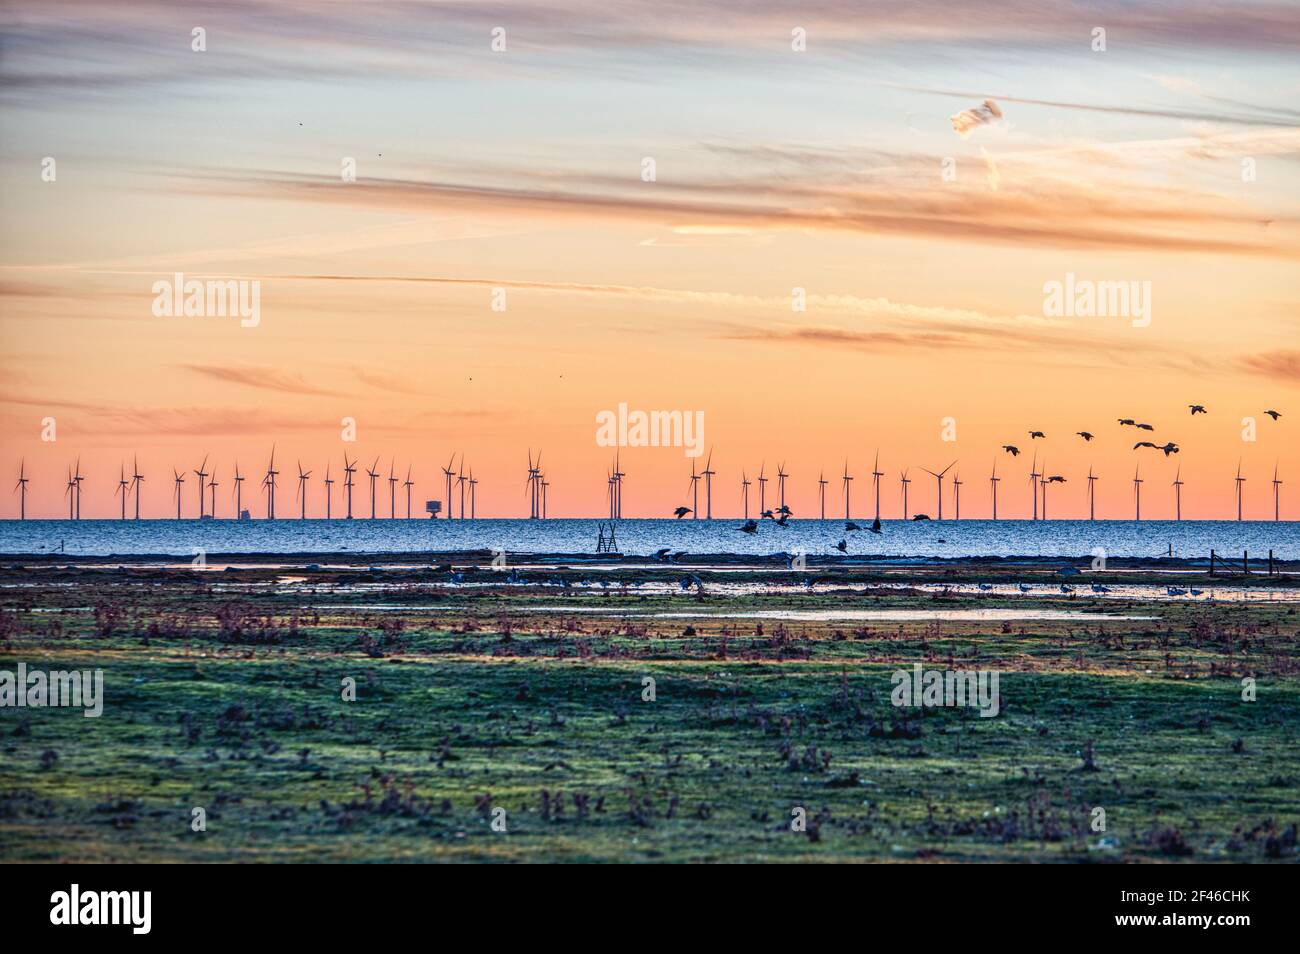 Sunset on offshore wind turbines park or wind power plant. Ecological coastal wind farm for electricity generation off Copenhagen in the Baltic sea Stock Photo